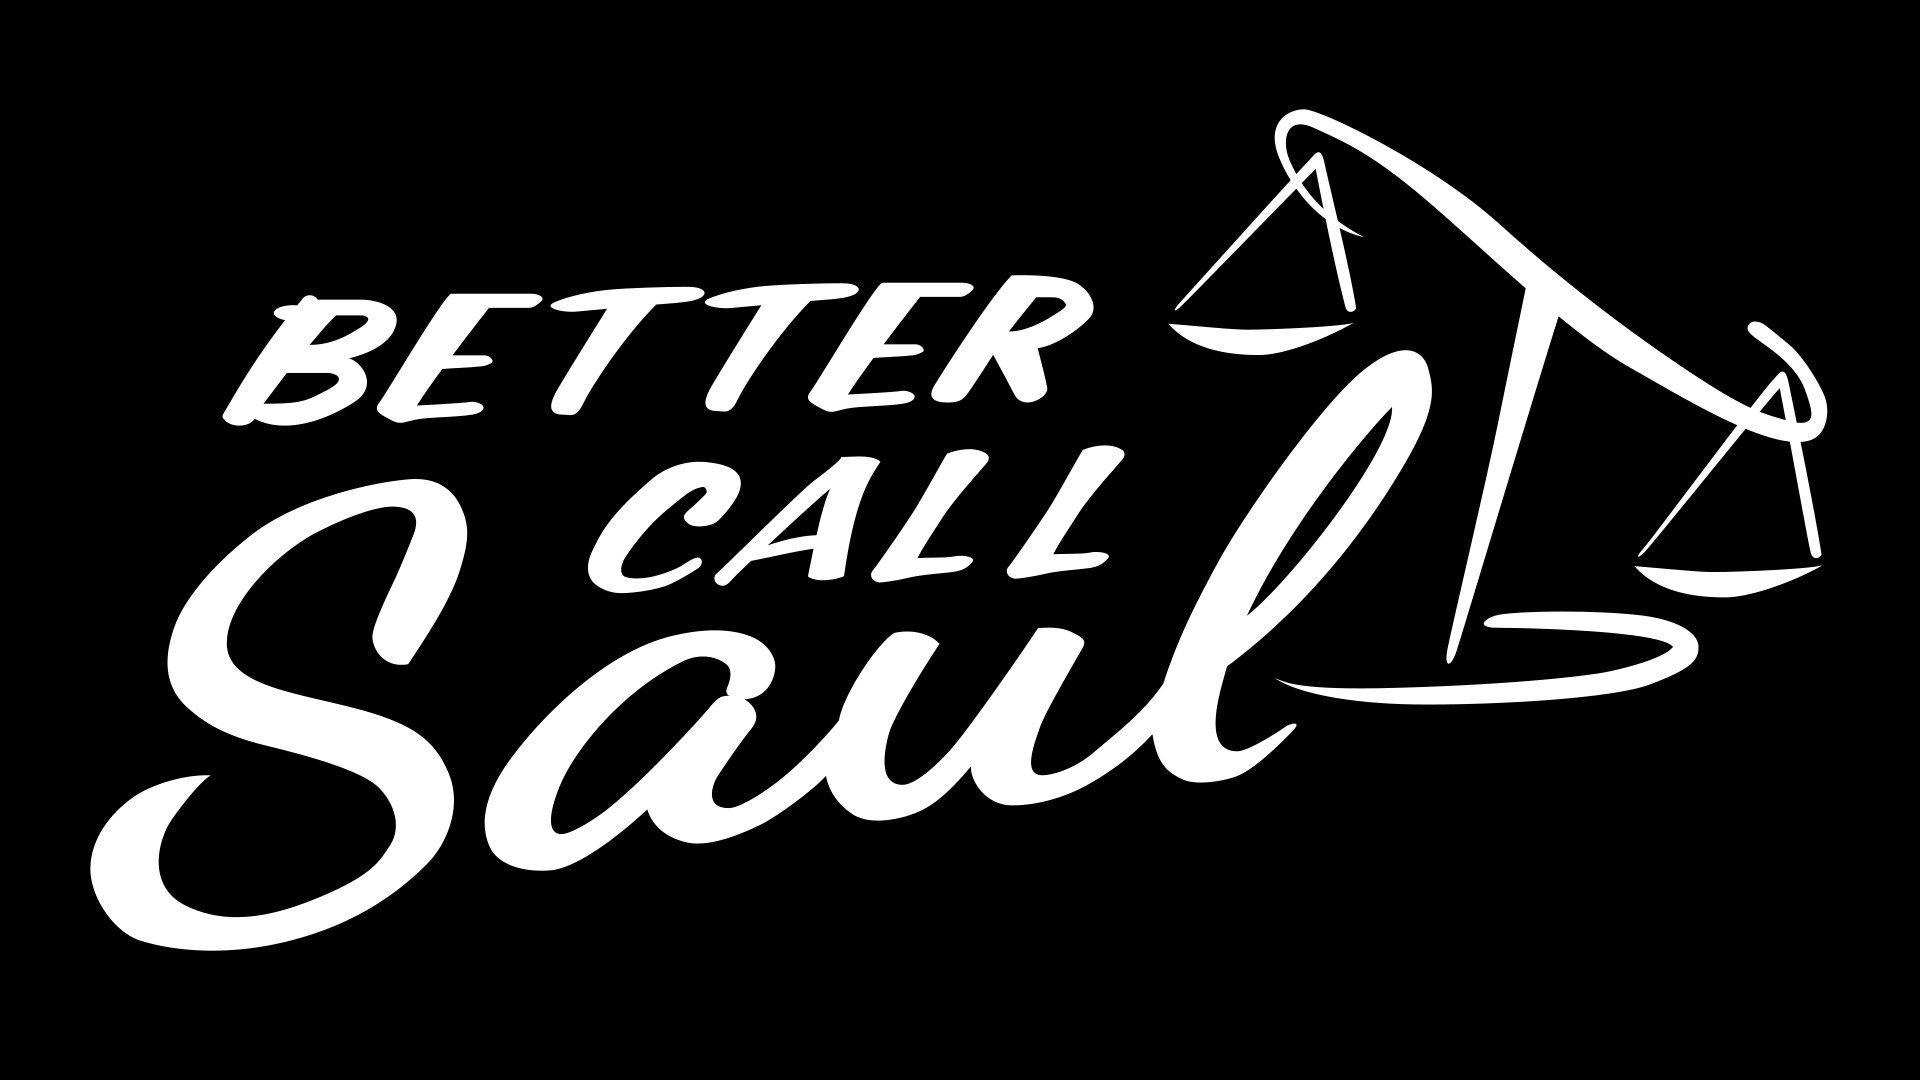 1978773, better call saul category